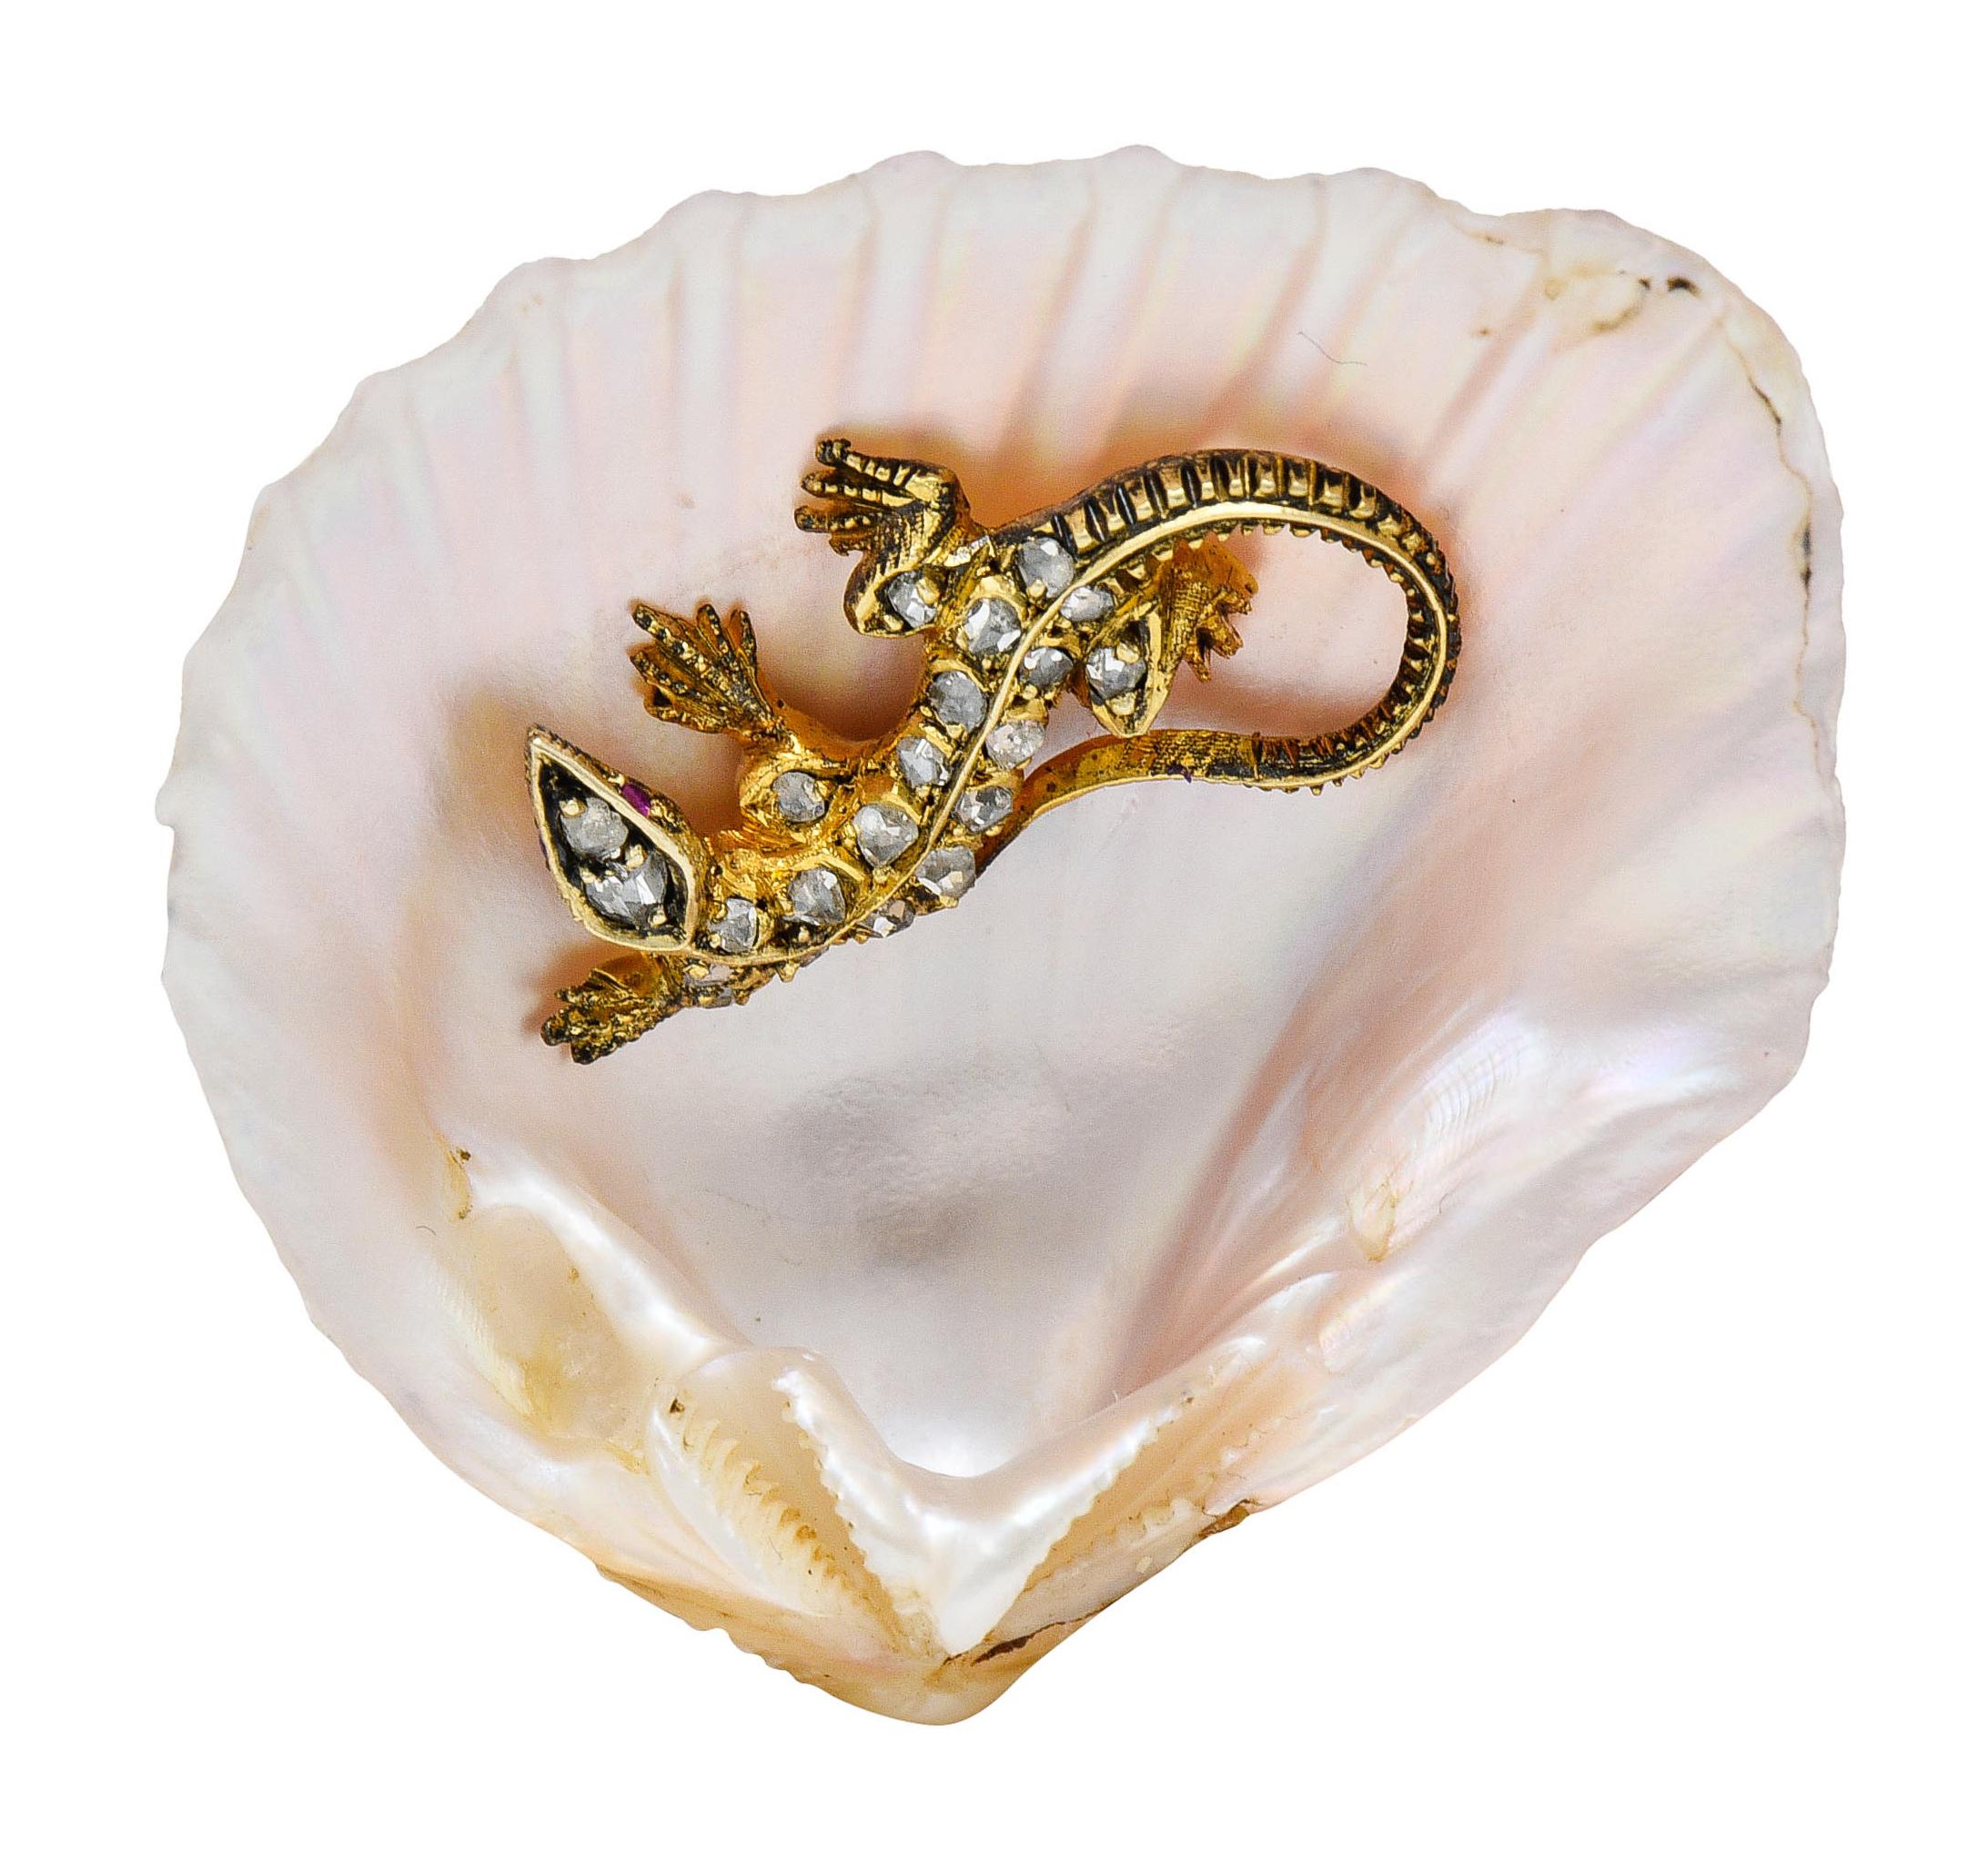 Brooch is designed with a cupped and scalloped shell

Pastel pink in color with strongly iridescent mother-of-pearl

Centering a stylized gold lizard accented by rose cut diamonds - approximately 0.20 carat

A Victorian object of courtship -